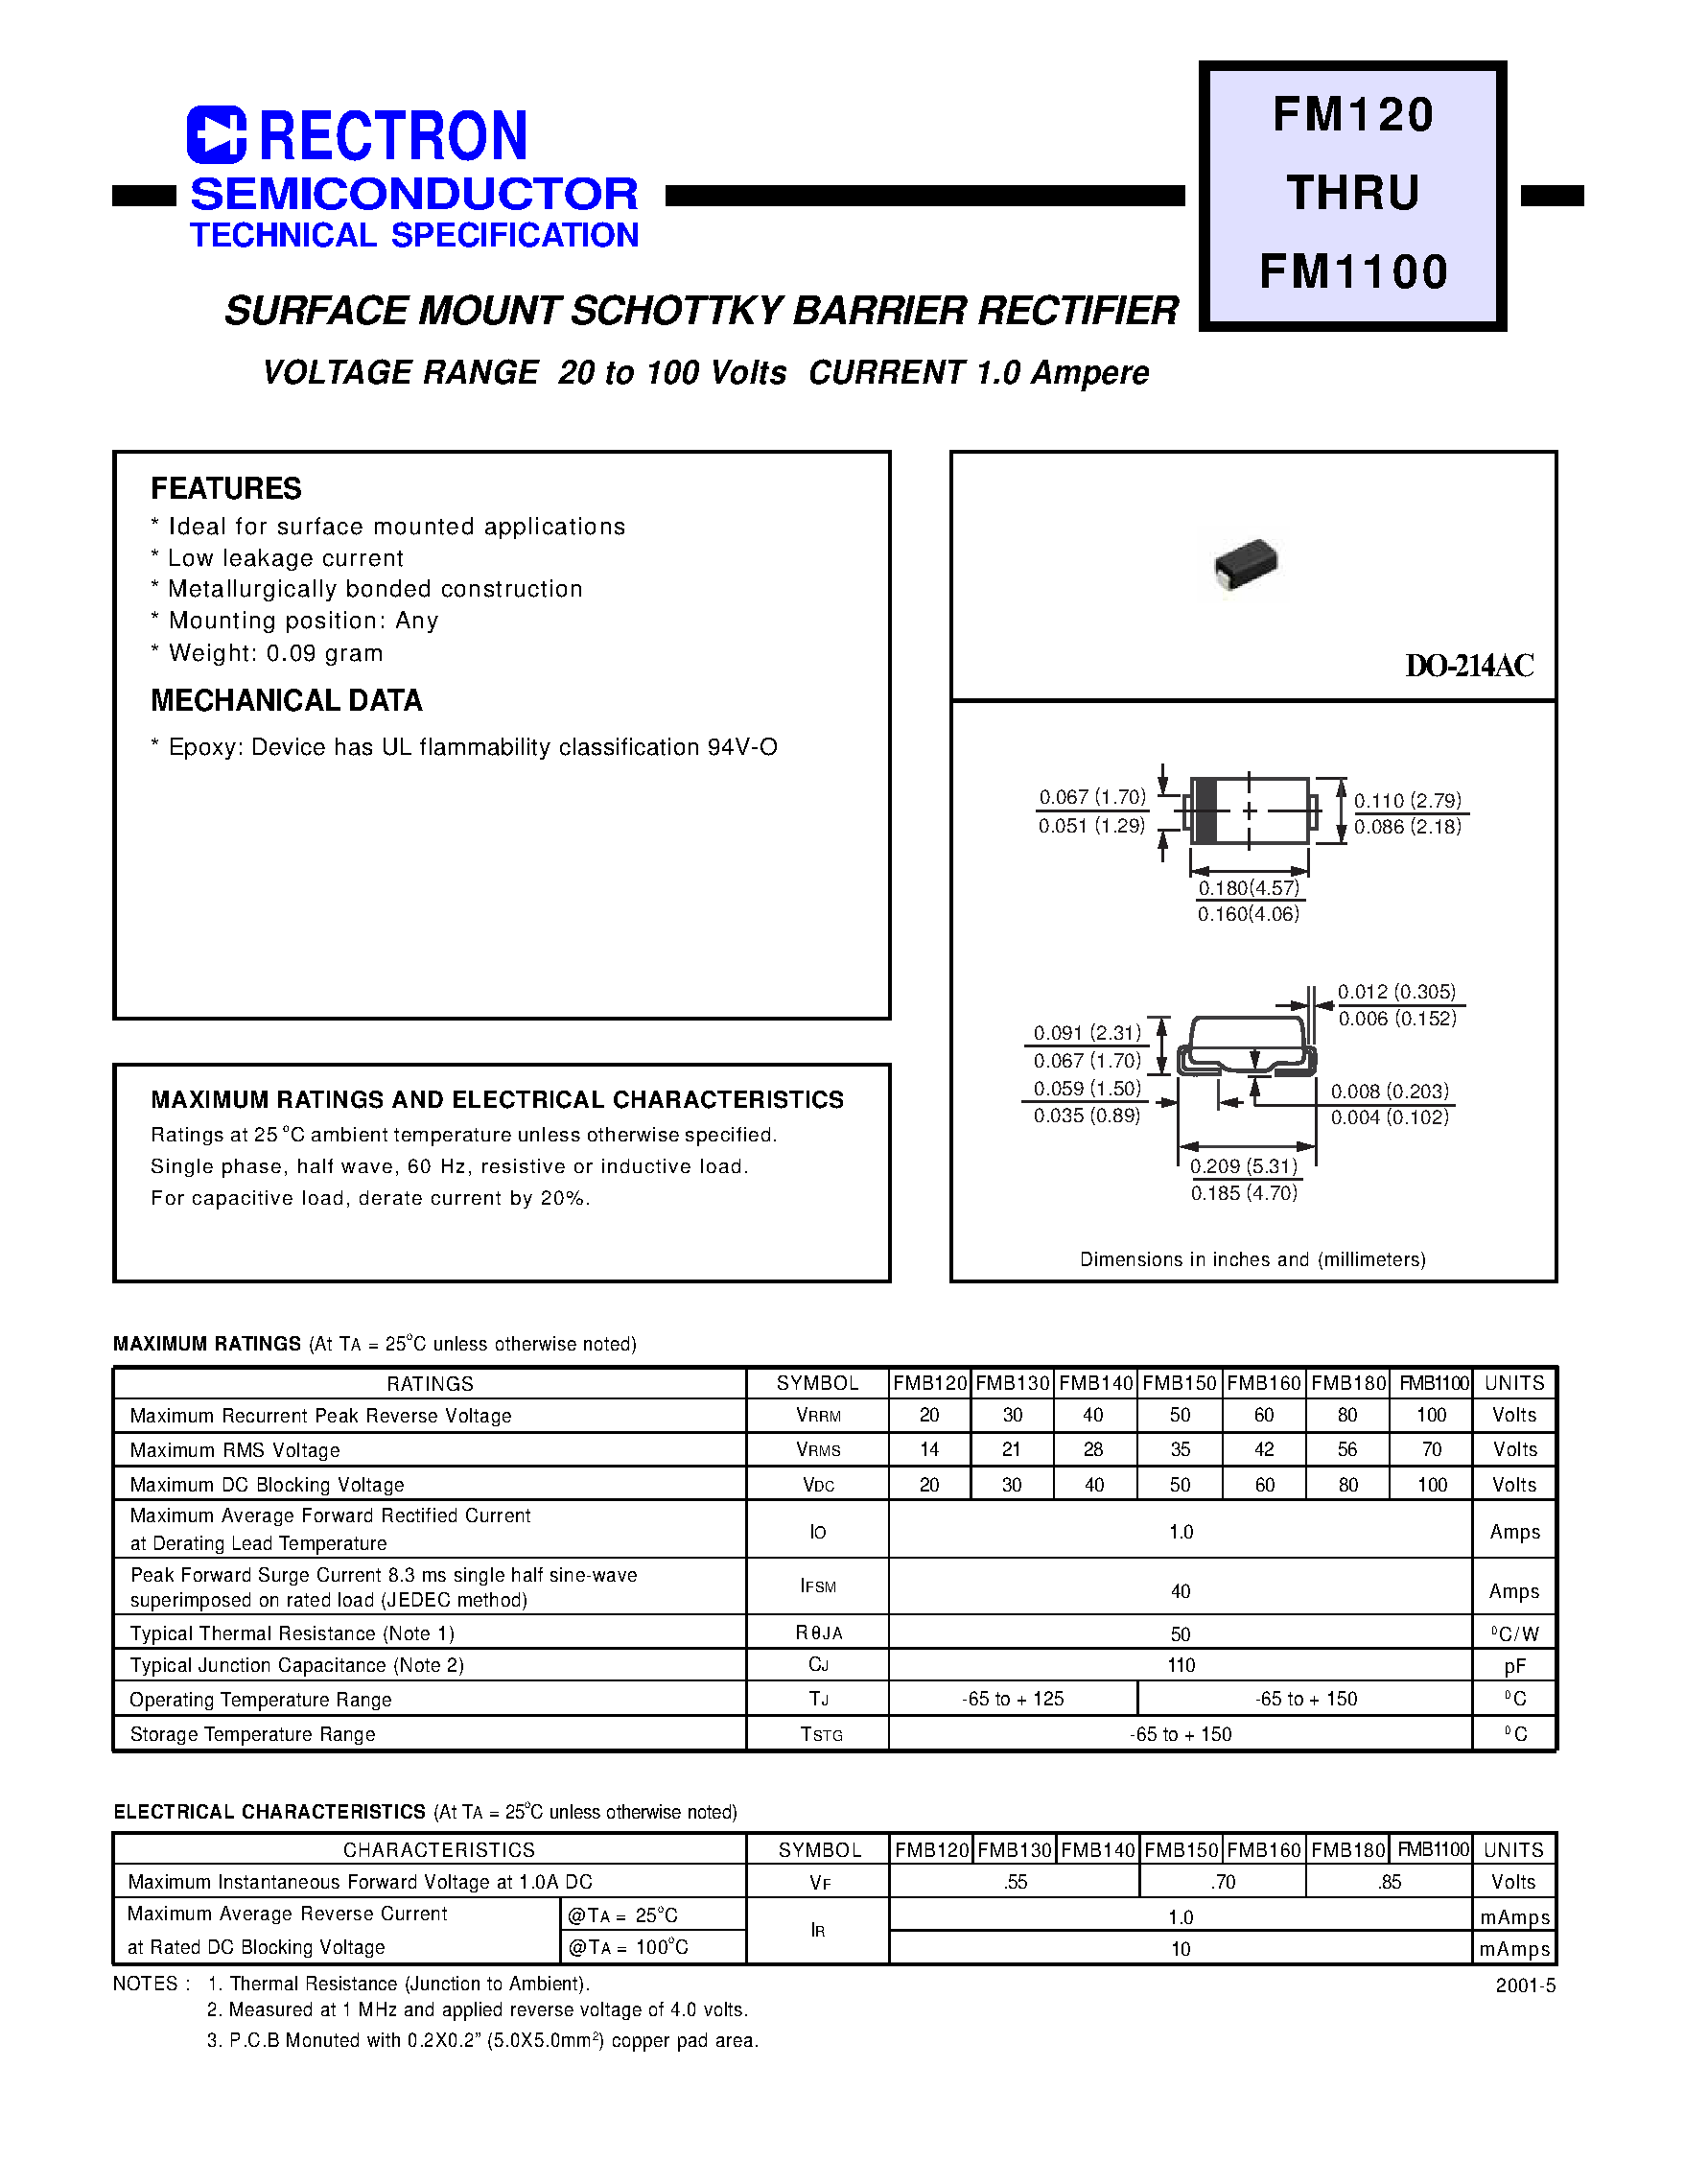 Datasheet FMB140 - SURFACE MOUNT SCHOTTKY BARRIER RECTIFIER (VOLTAGE RANGE 20 to 100 Volts CURRENT 1.0 Ampere) page 1